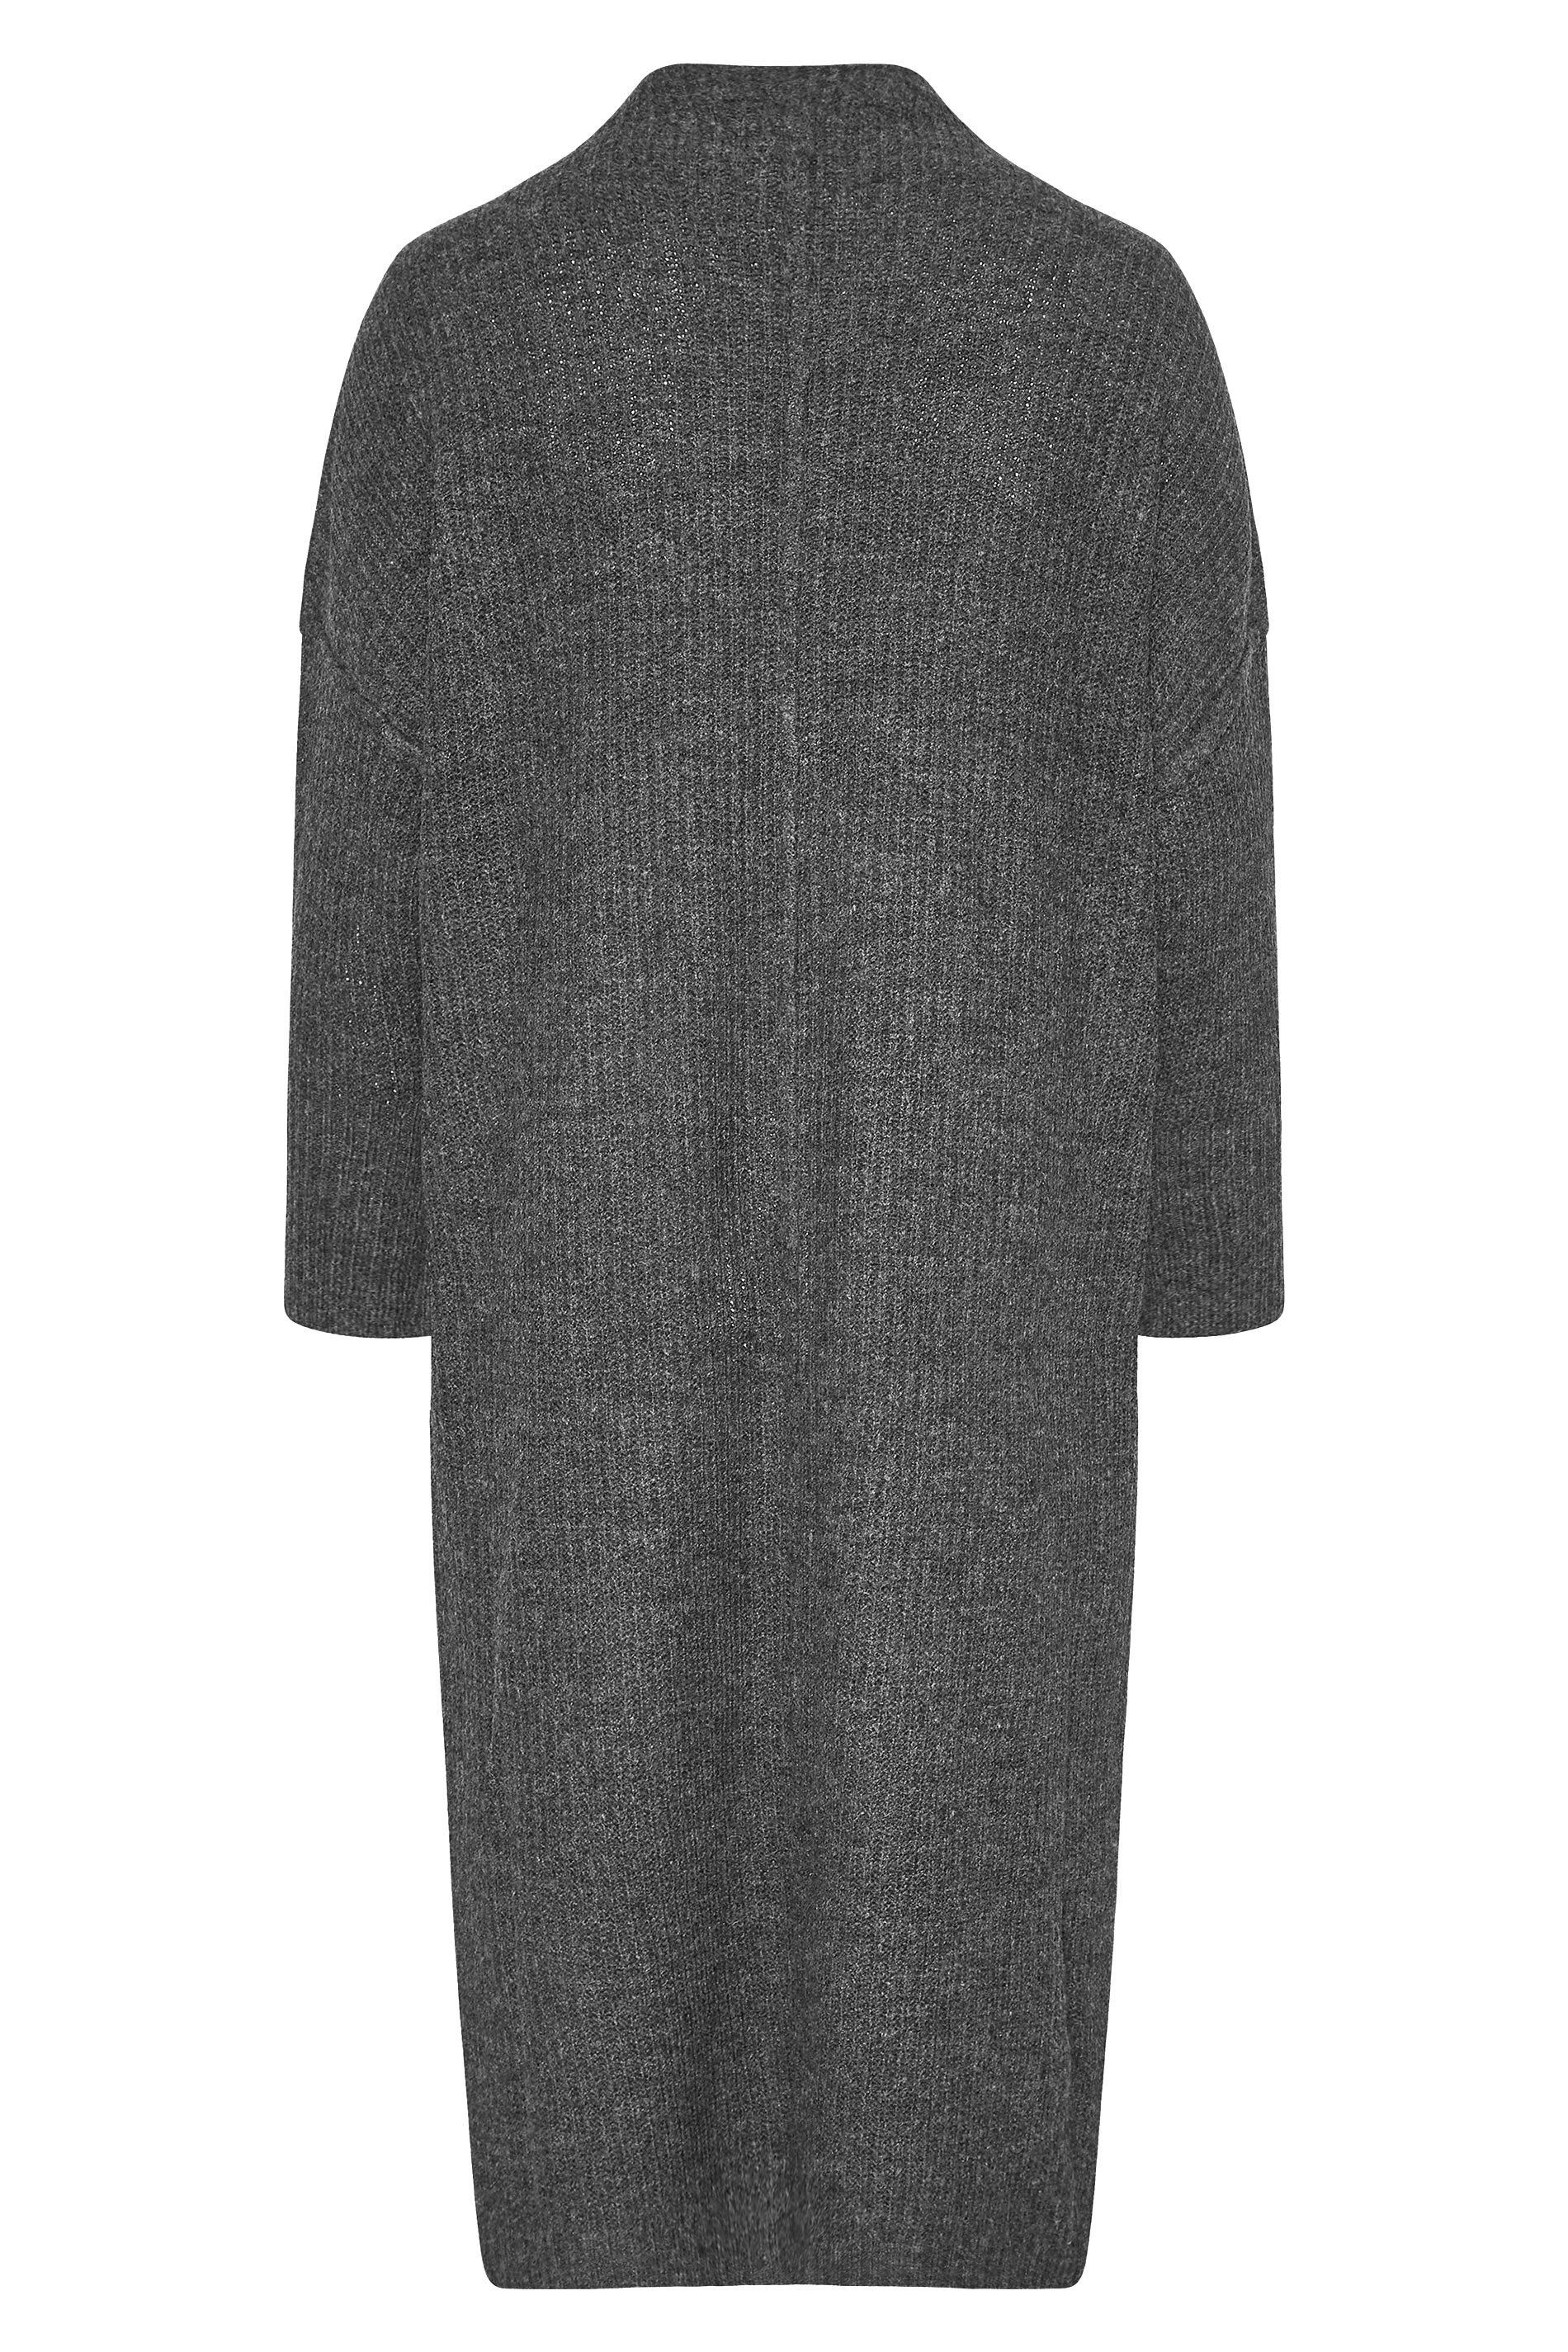 Plus Size Curve Charcoal Grey Knitted Jumper Dress | Yours Clothing